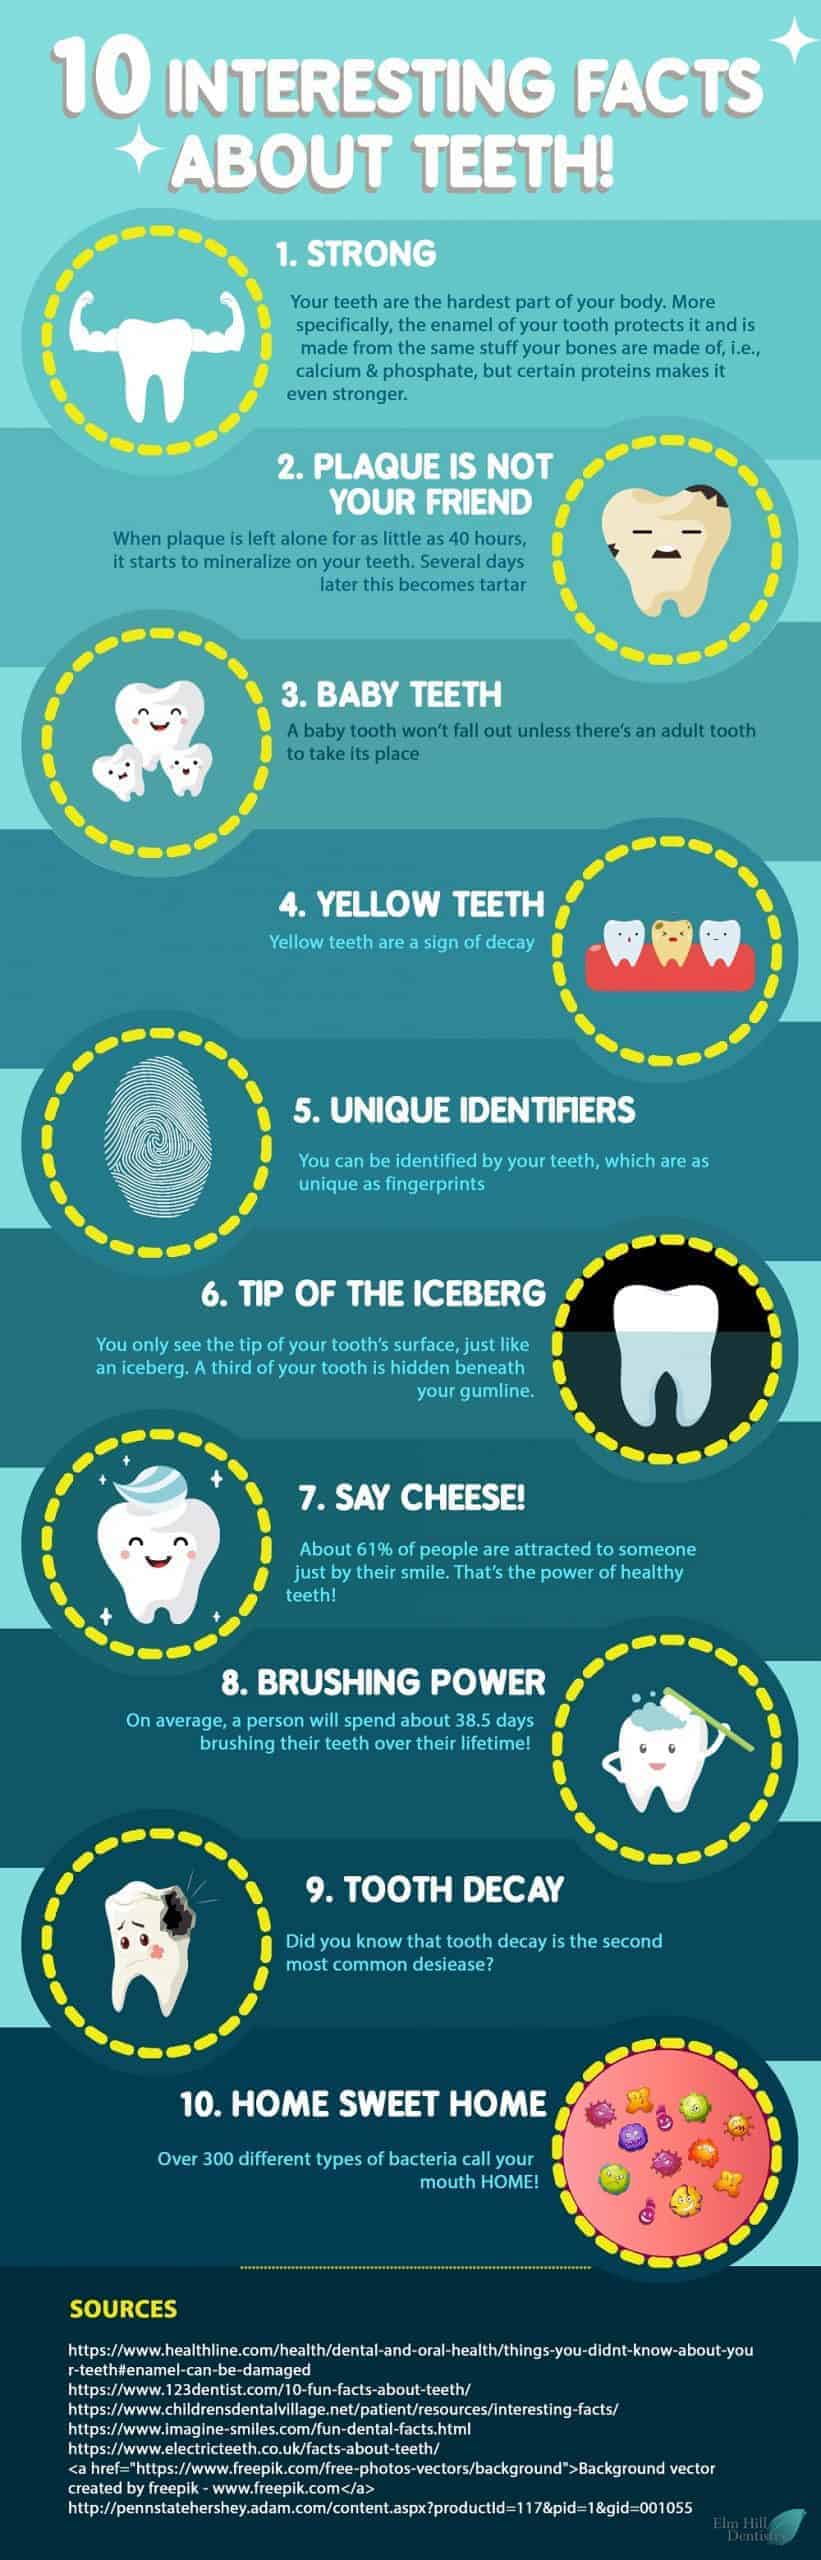 10 Interesting Facts About Your Teeth